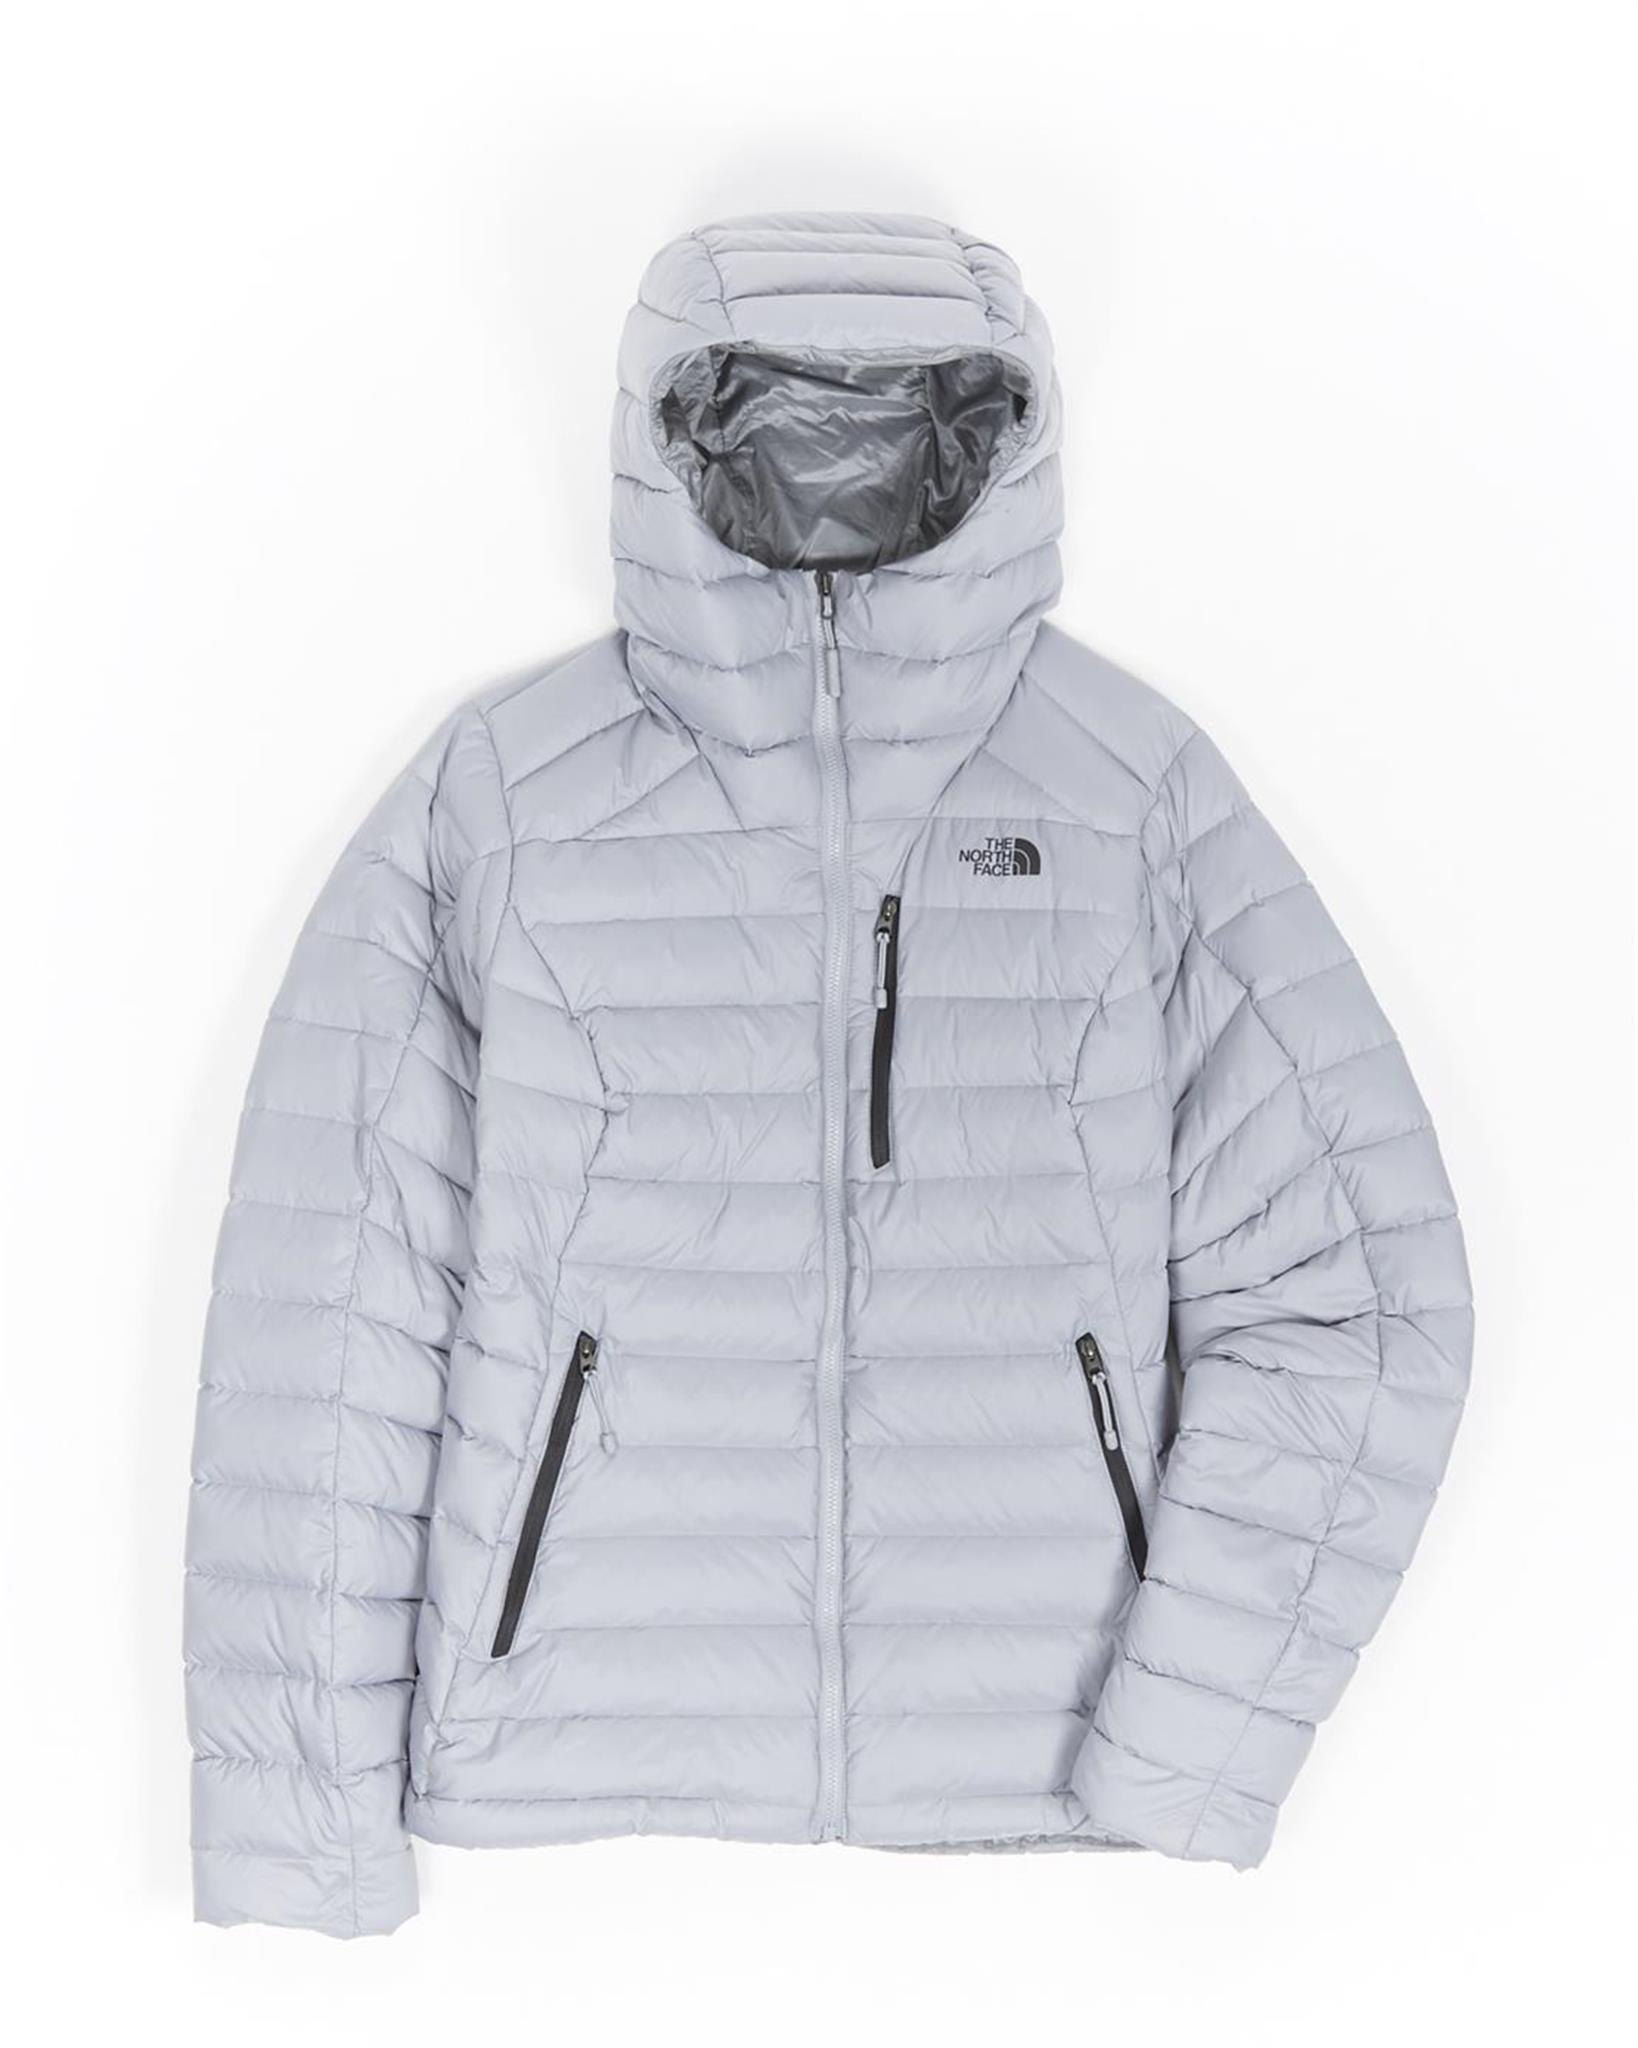 The North Face Morph Hoodie Women's